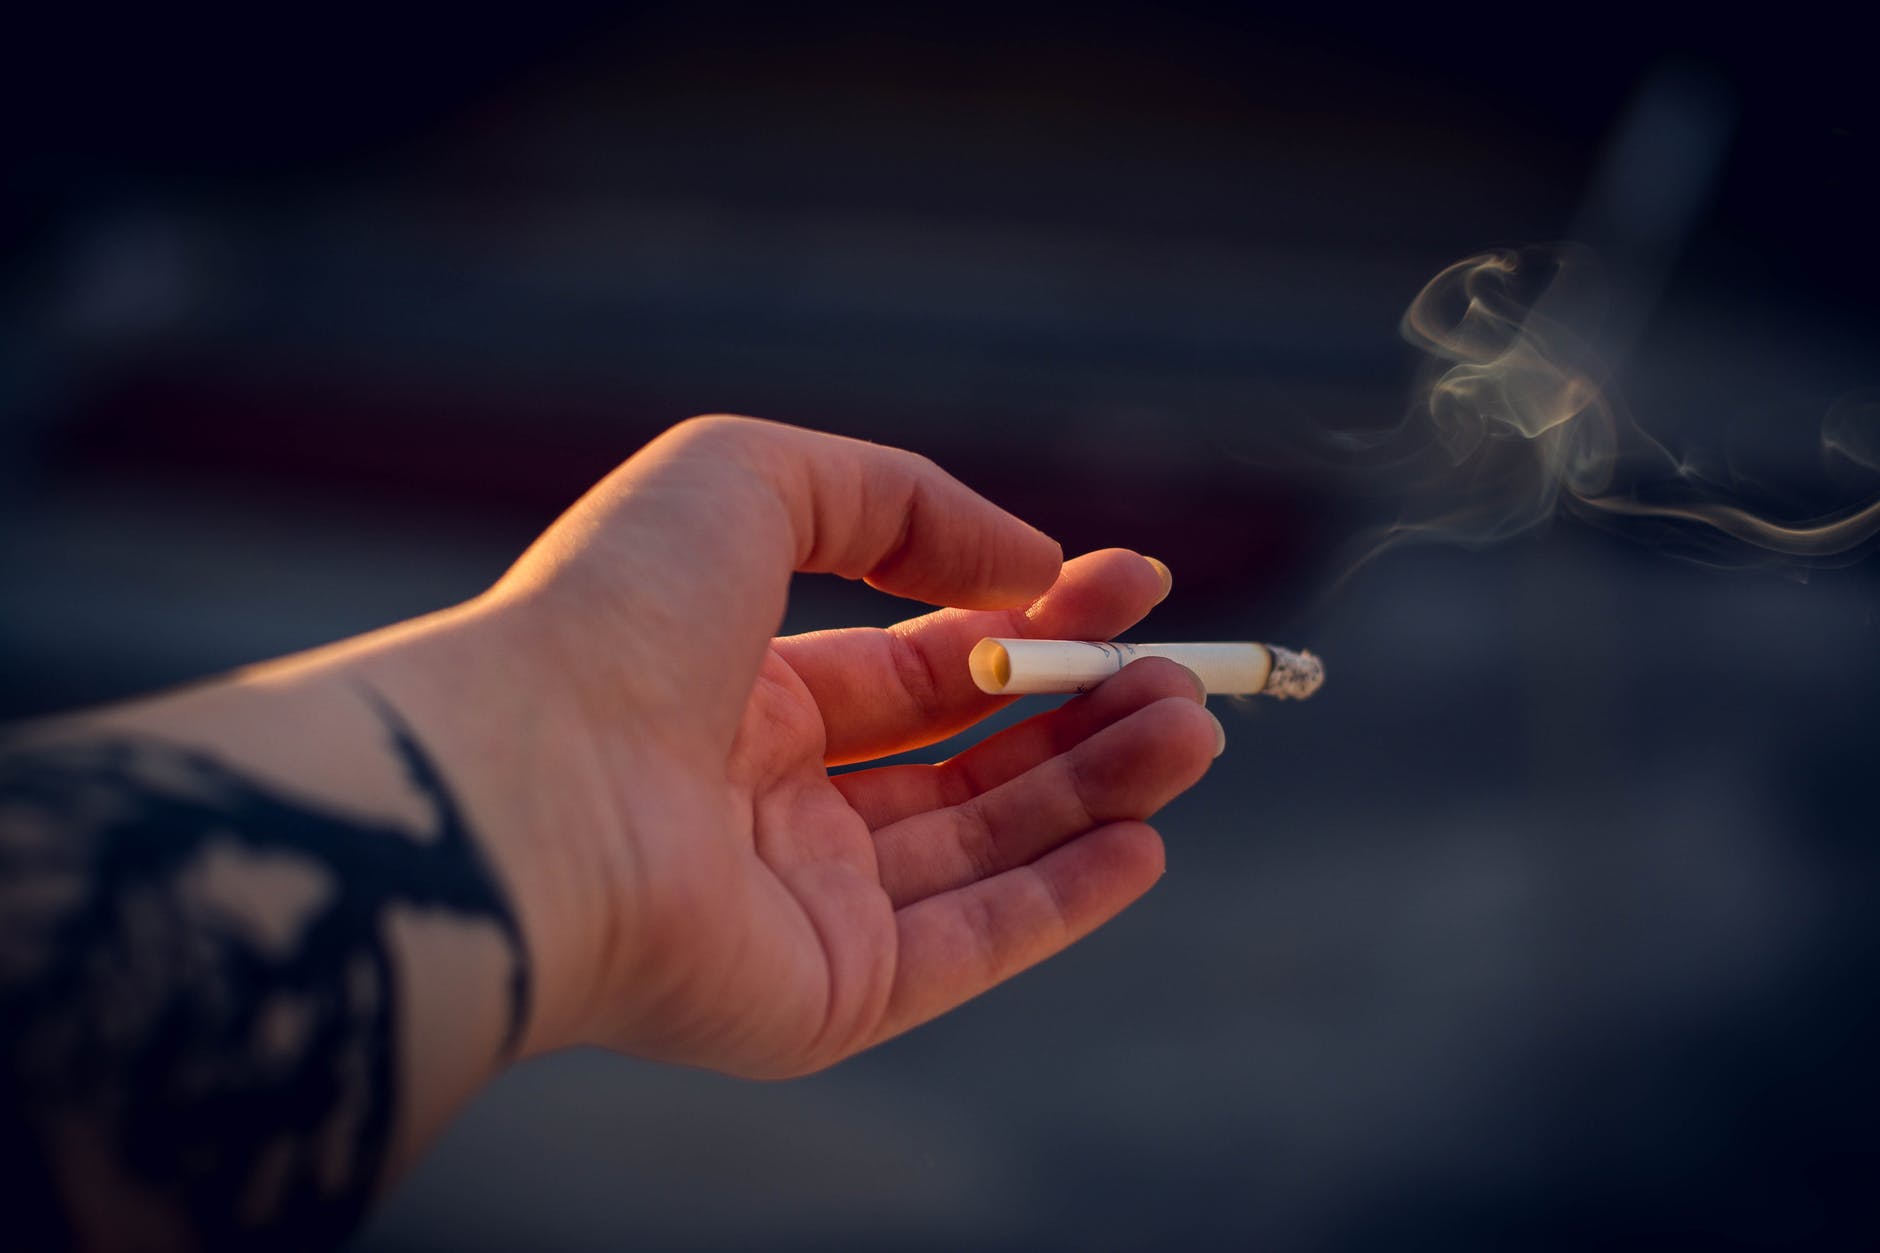 Smoking is injurious to health” – Myths, facts and risks